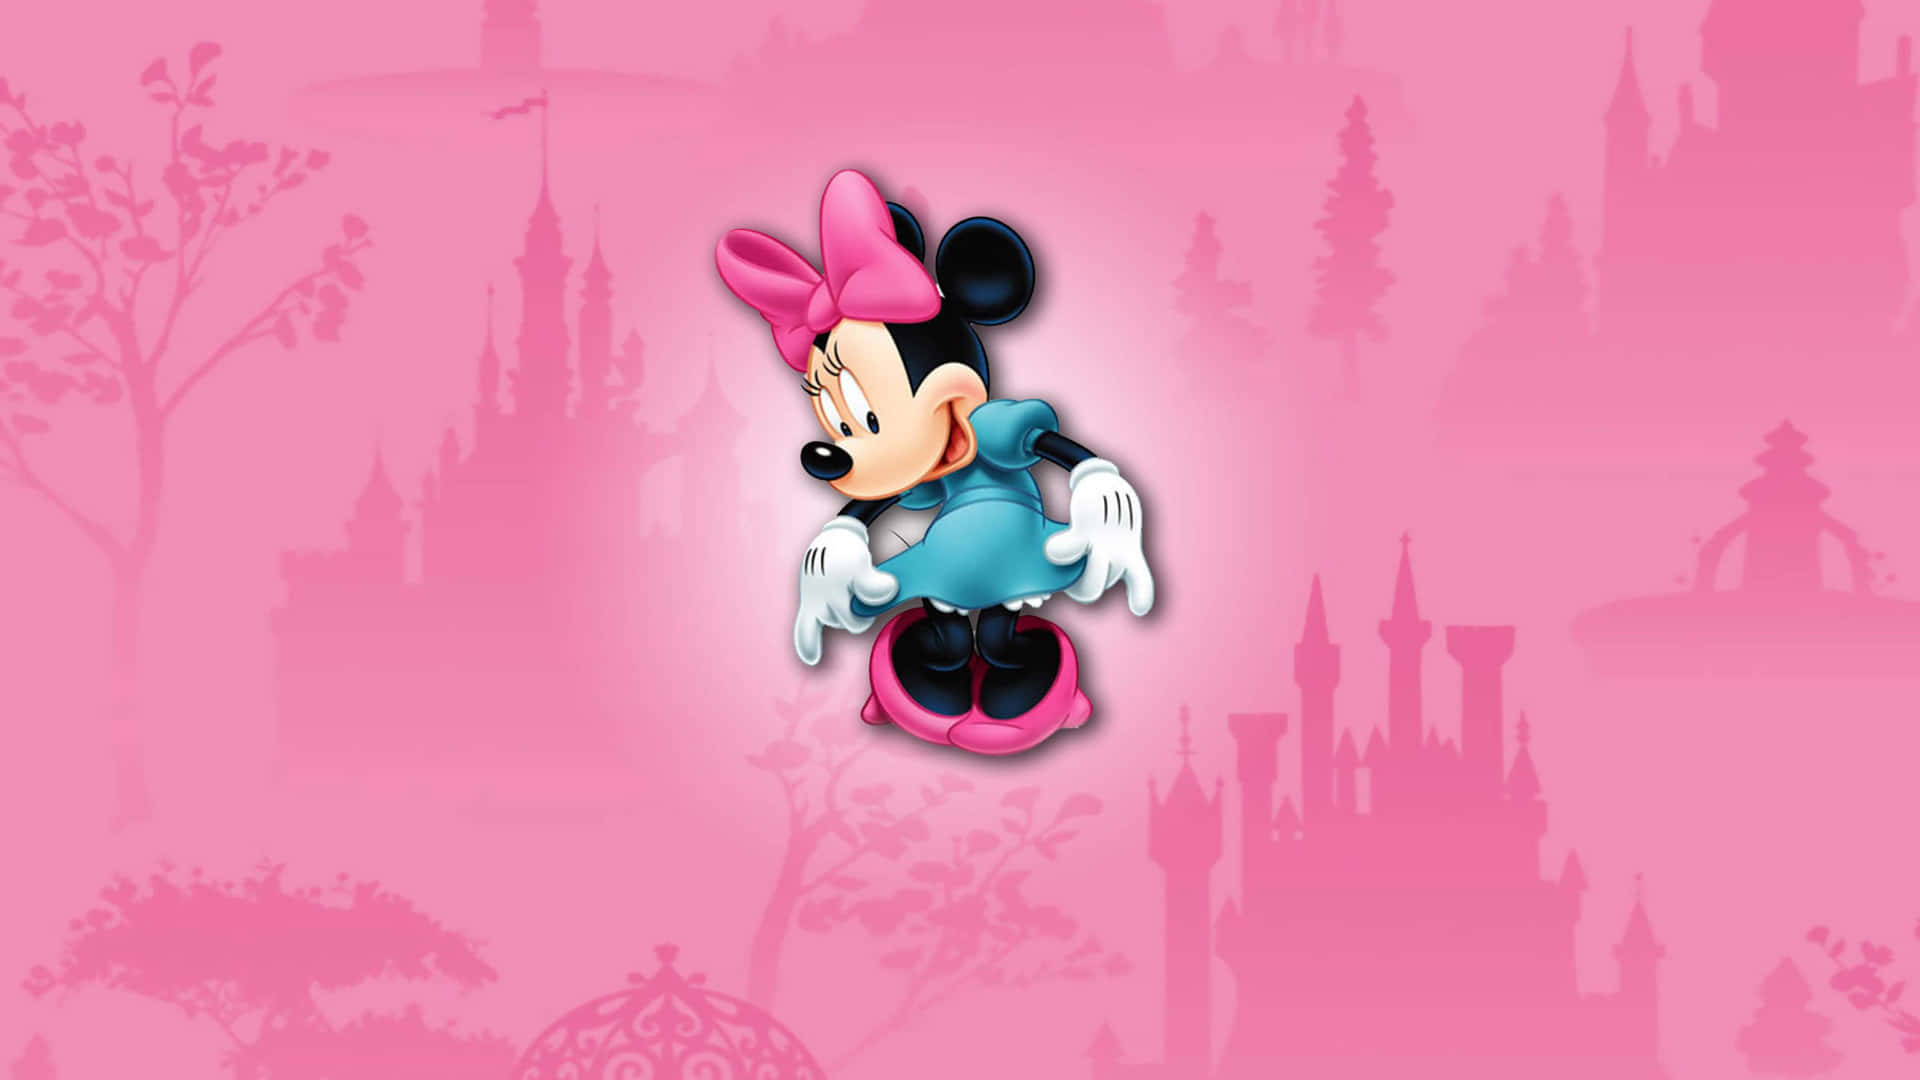 The iconic Minnie Mouse dressed in a soft pink outfit. Wallpaper